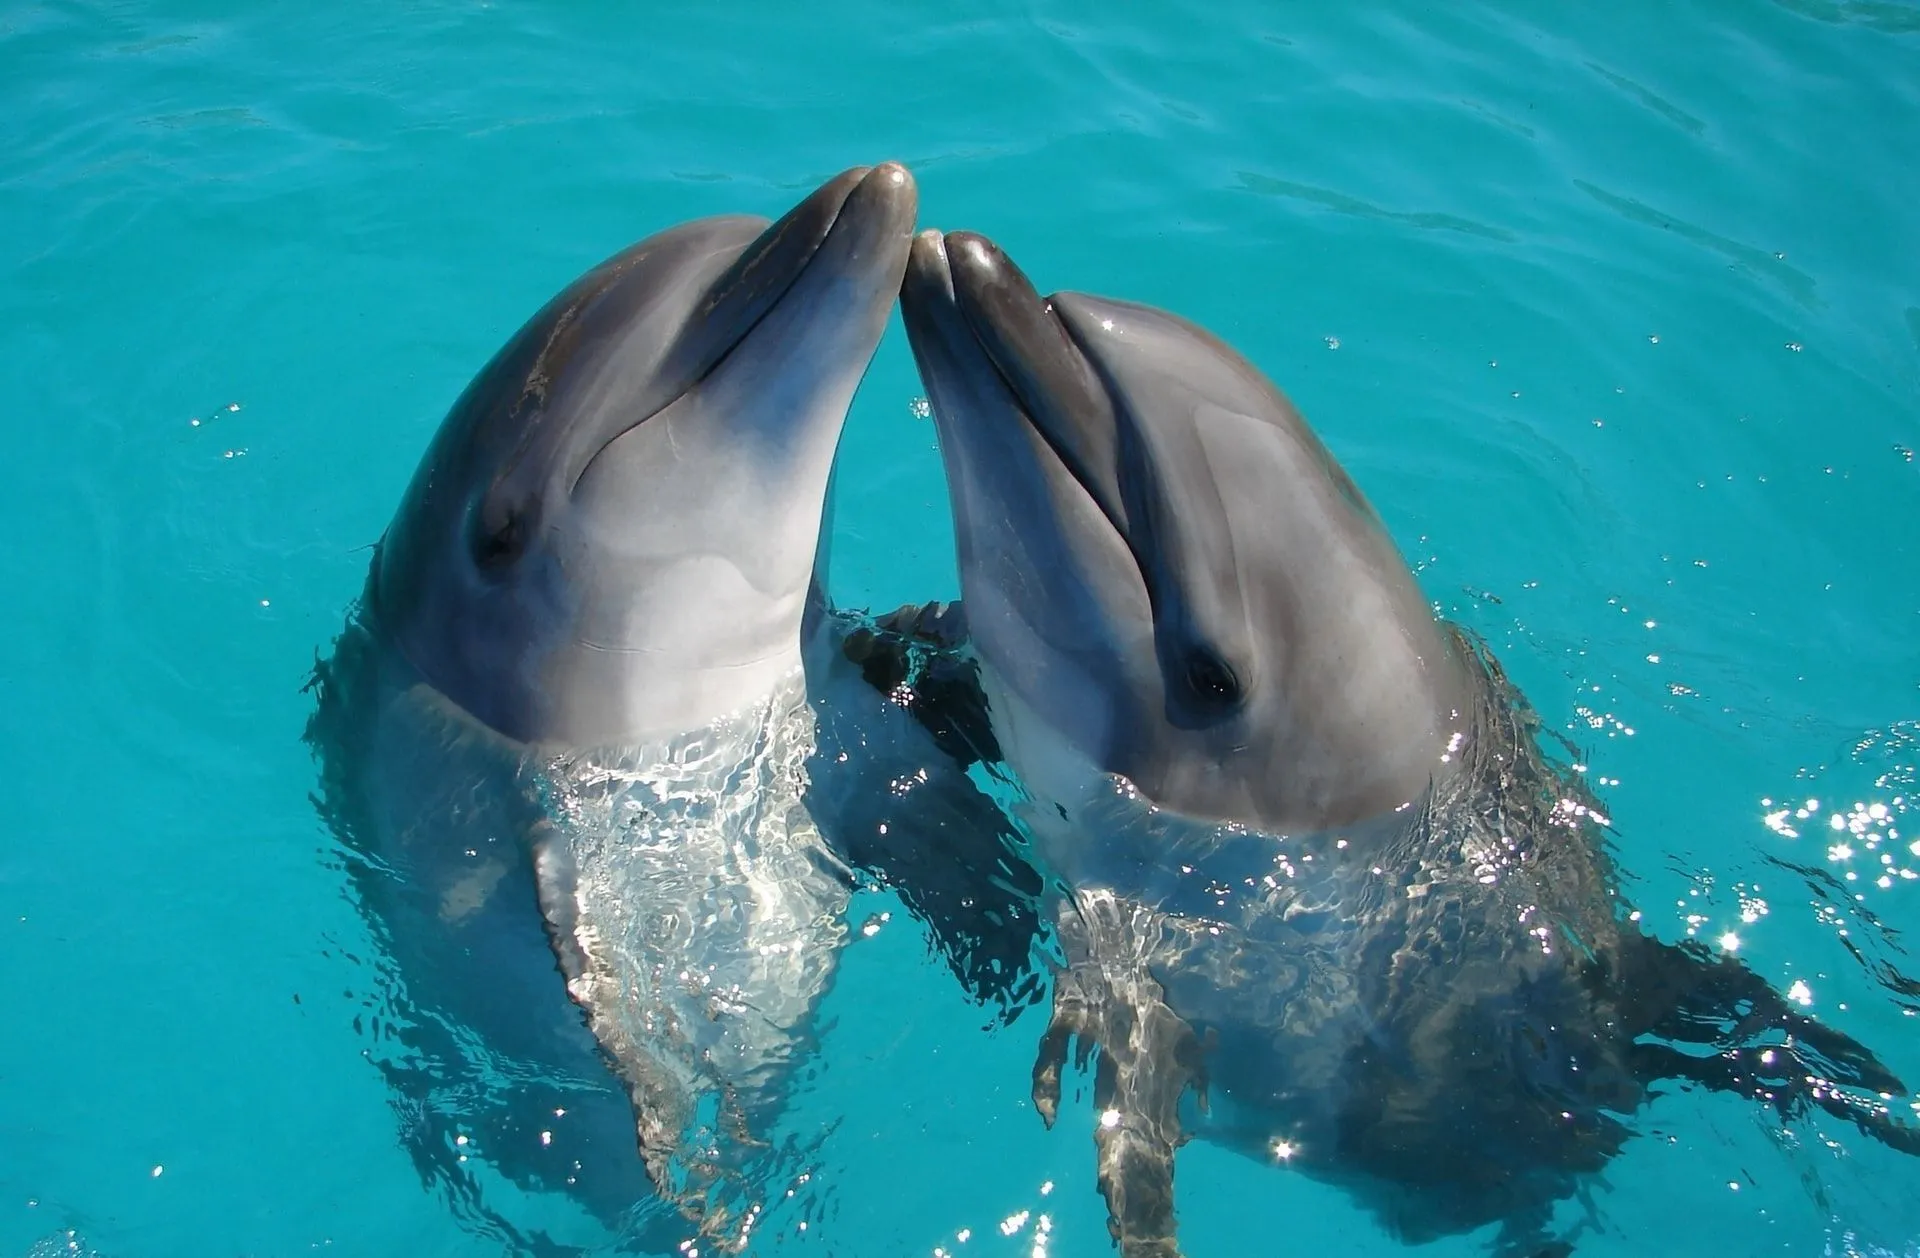 Dolphins use echolocation to locate food underwater